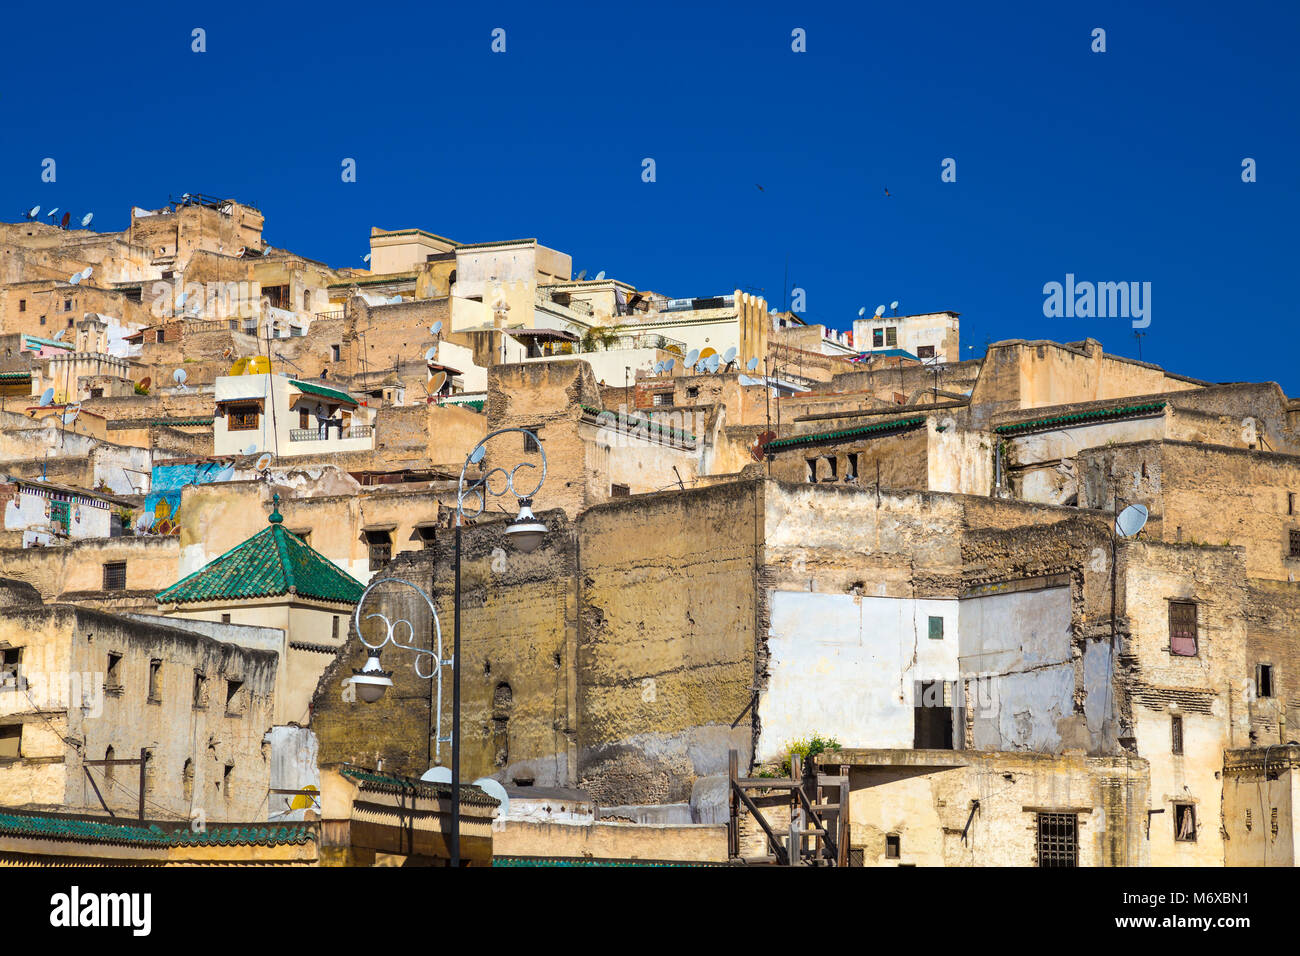 Roofs of moroccan houses on a hill, Old Medina souks, Fes el Bali, Fes, Morocco Stock Photo